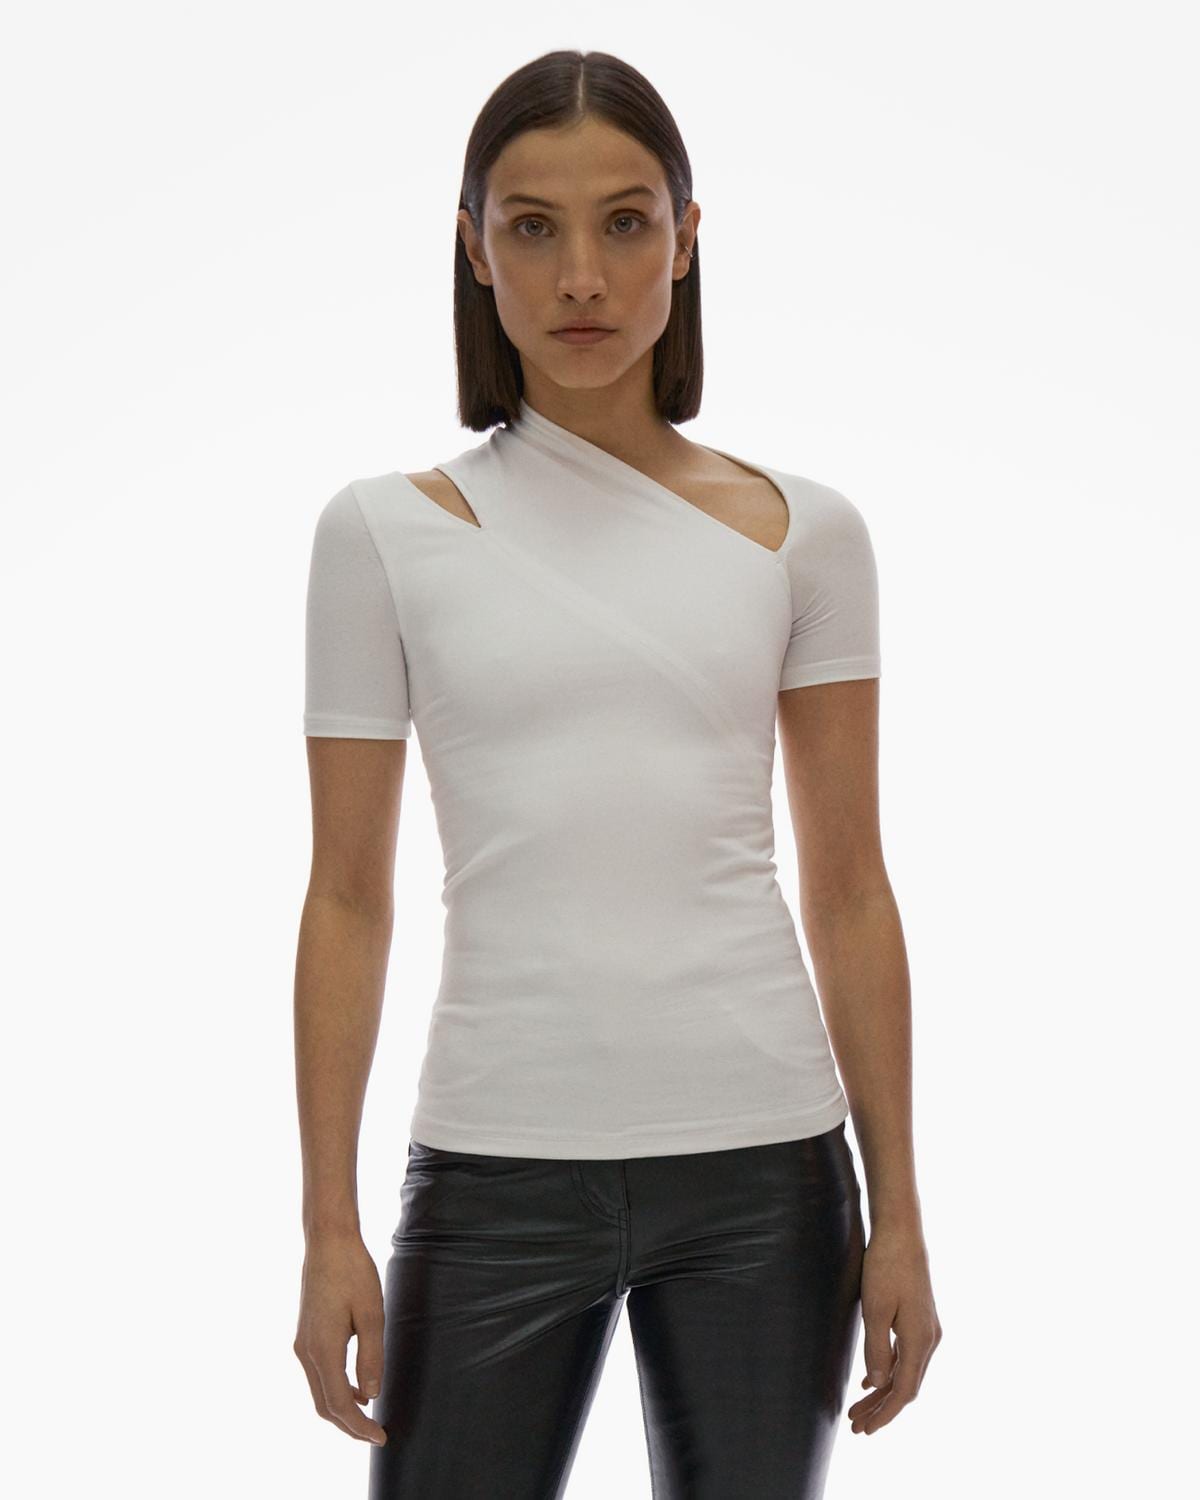 Helmut Lang Q4 / Q1 Capsule Collection Release — ARBITRAGE NYC